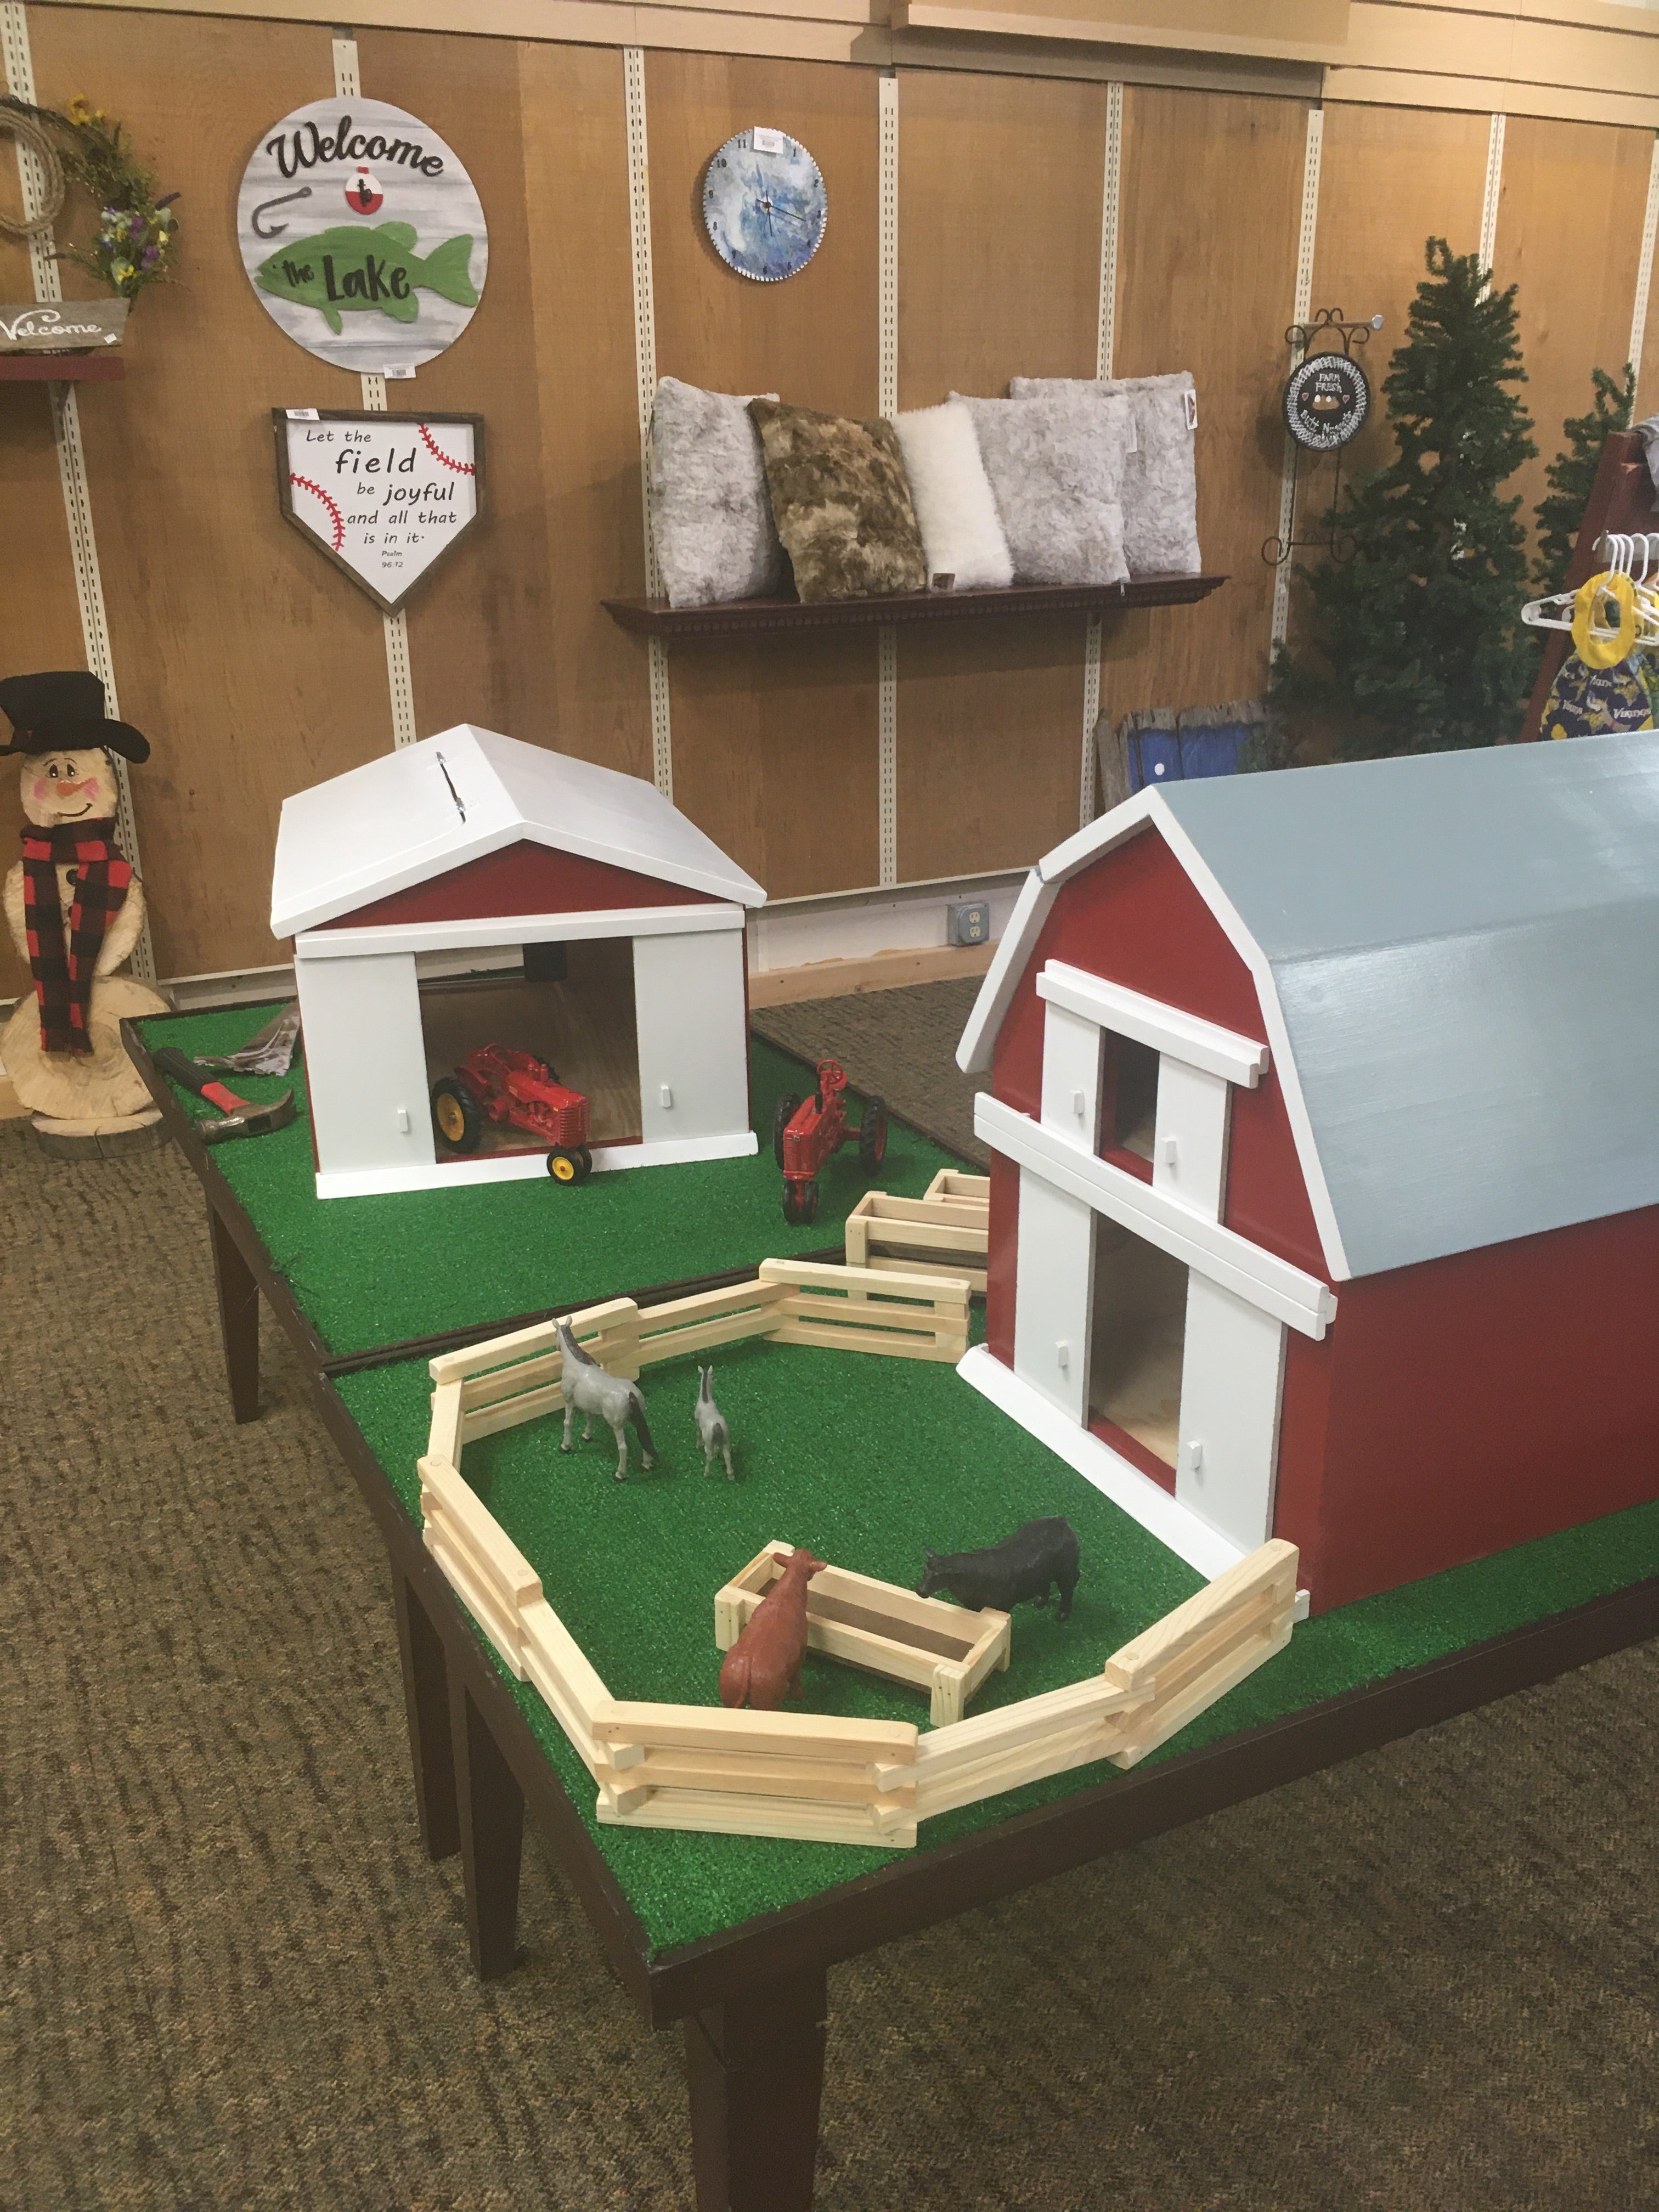 Farm Toy Barn and Machine shed with fencing and animals for pretend play